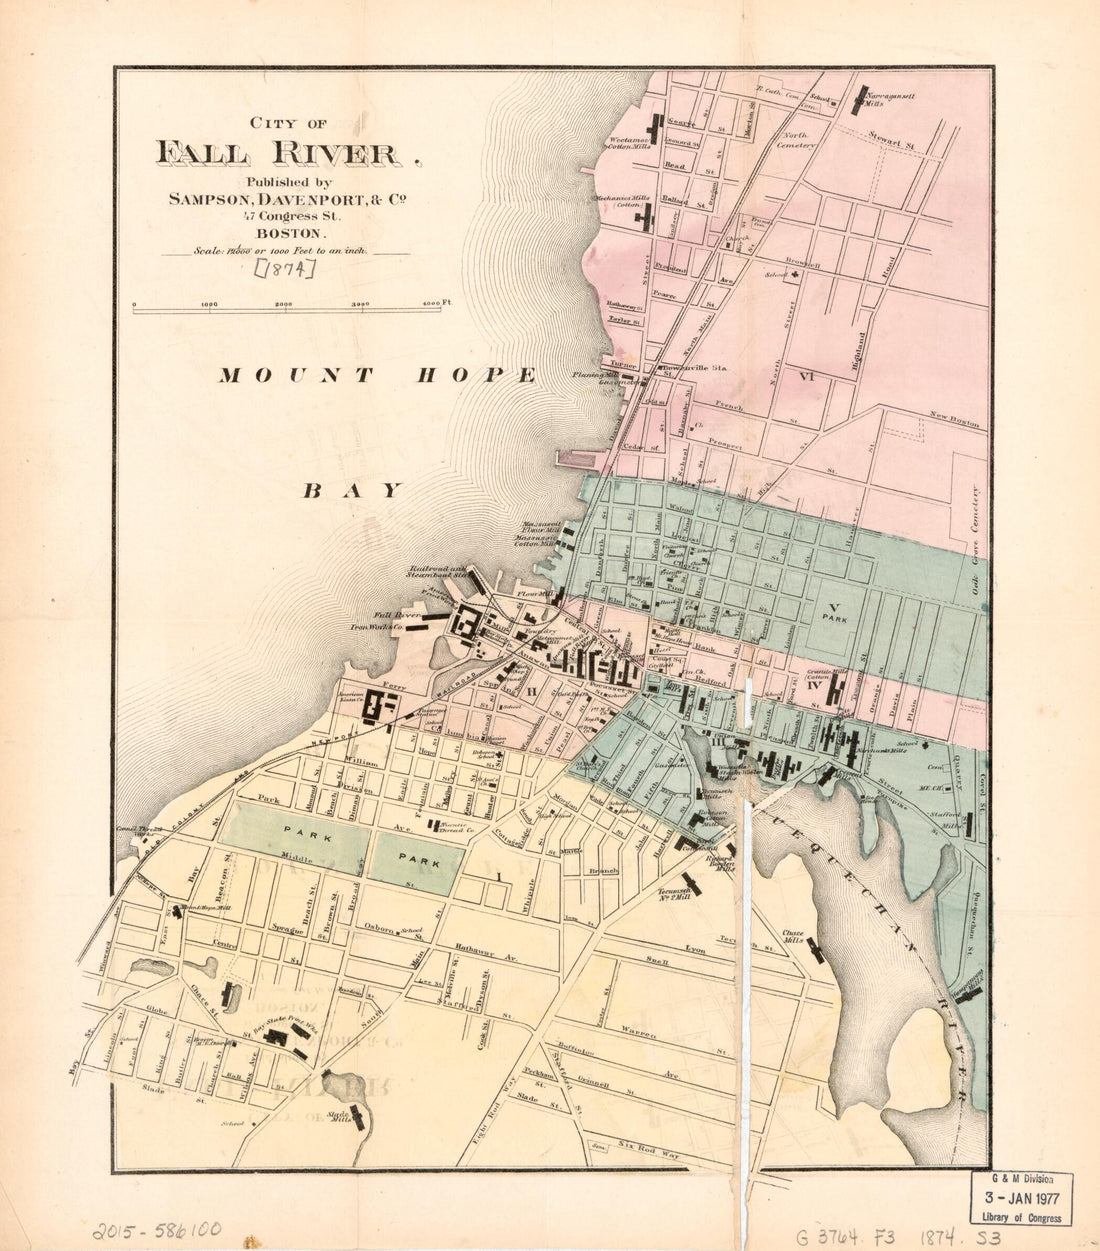 This old map of City of Fall River from 1874 was created by Davenport &amp; Co Sampson in 1874